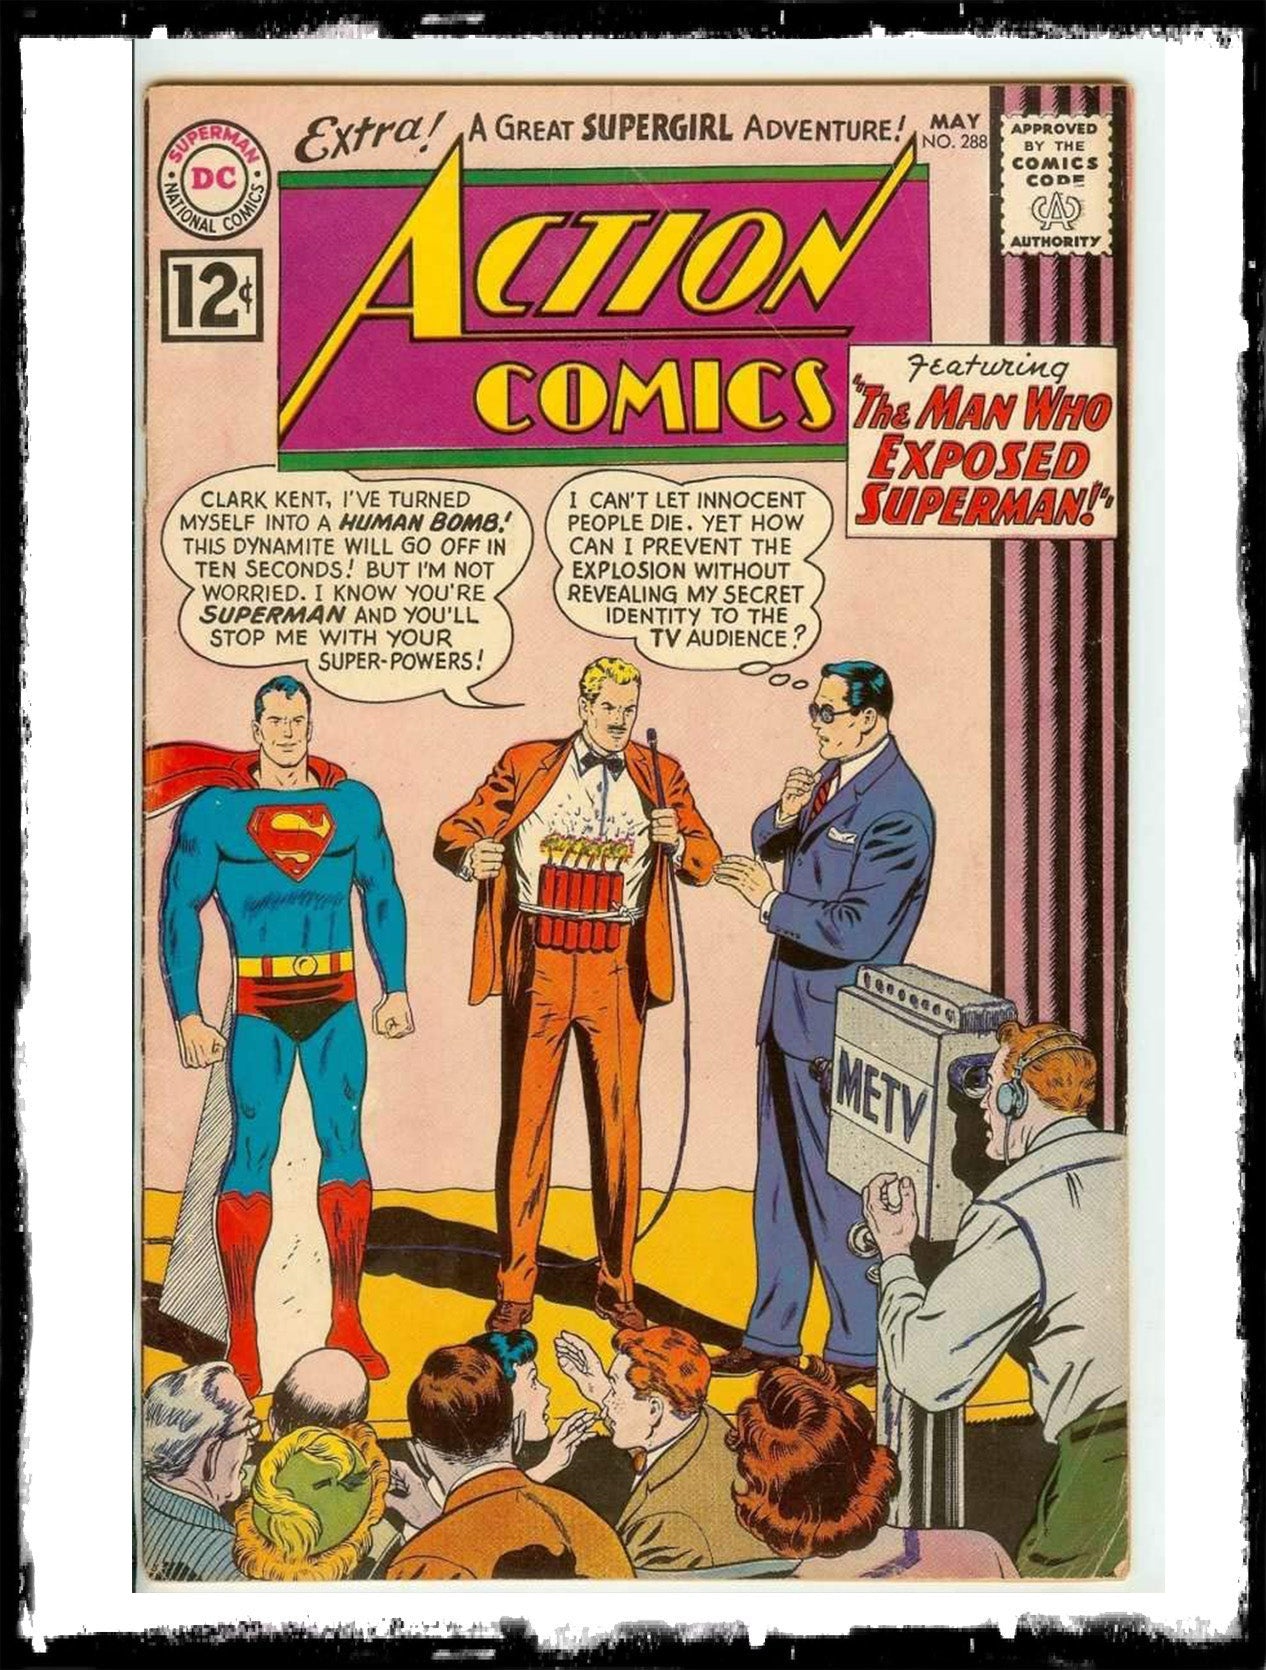 ACTION COMICS - #288 "THE MAN WHO EXPOSED SUPERMAN" (1962 - VF-/VF)